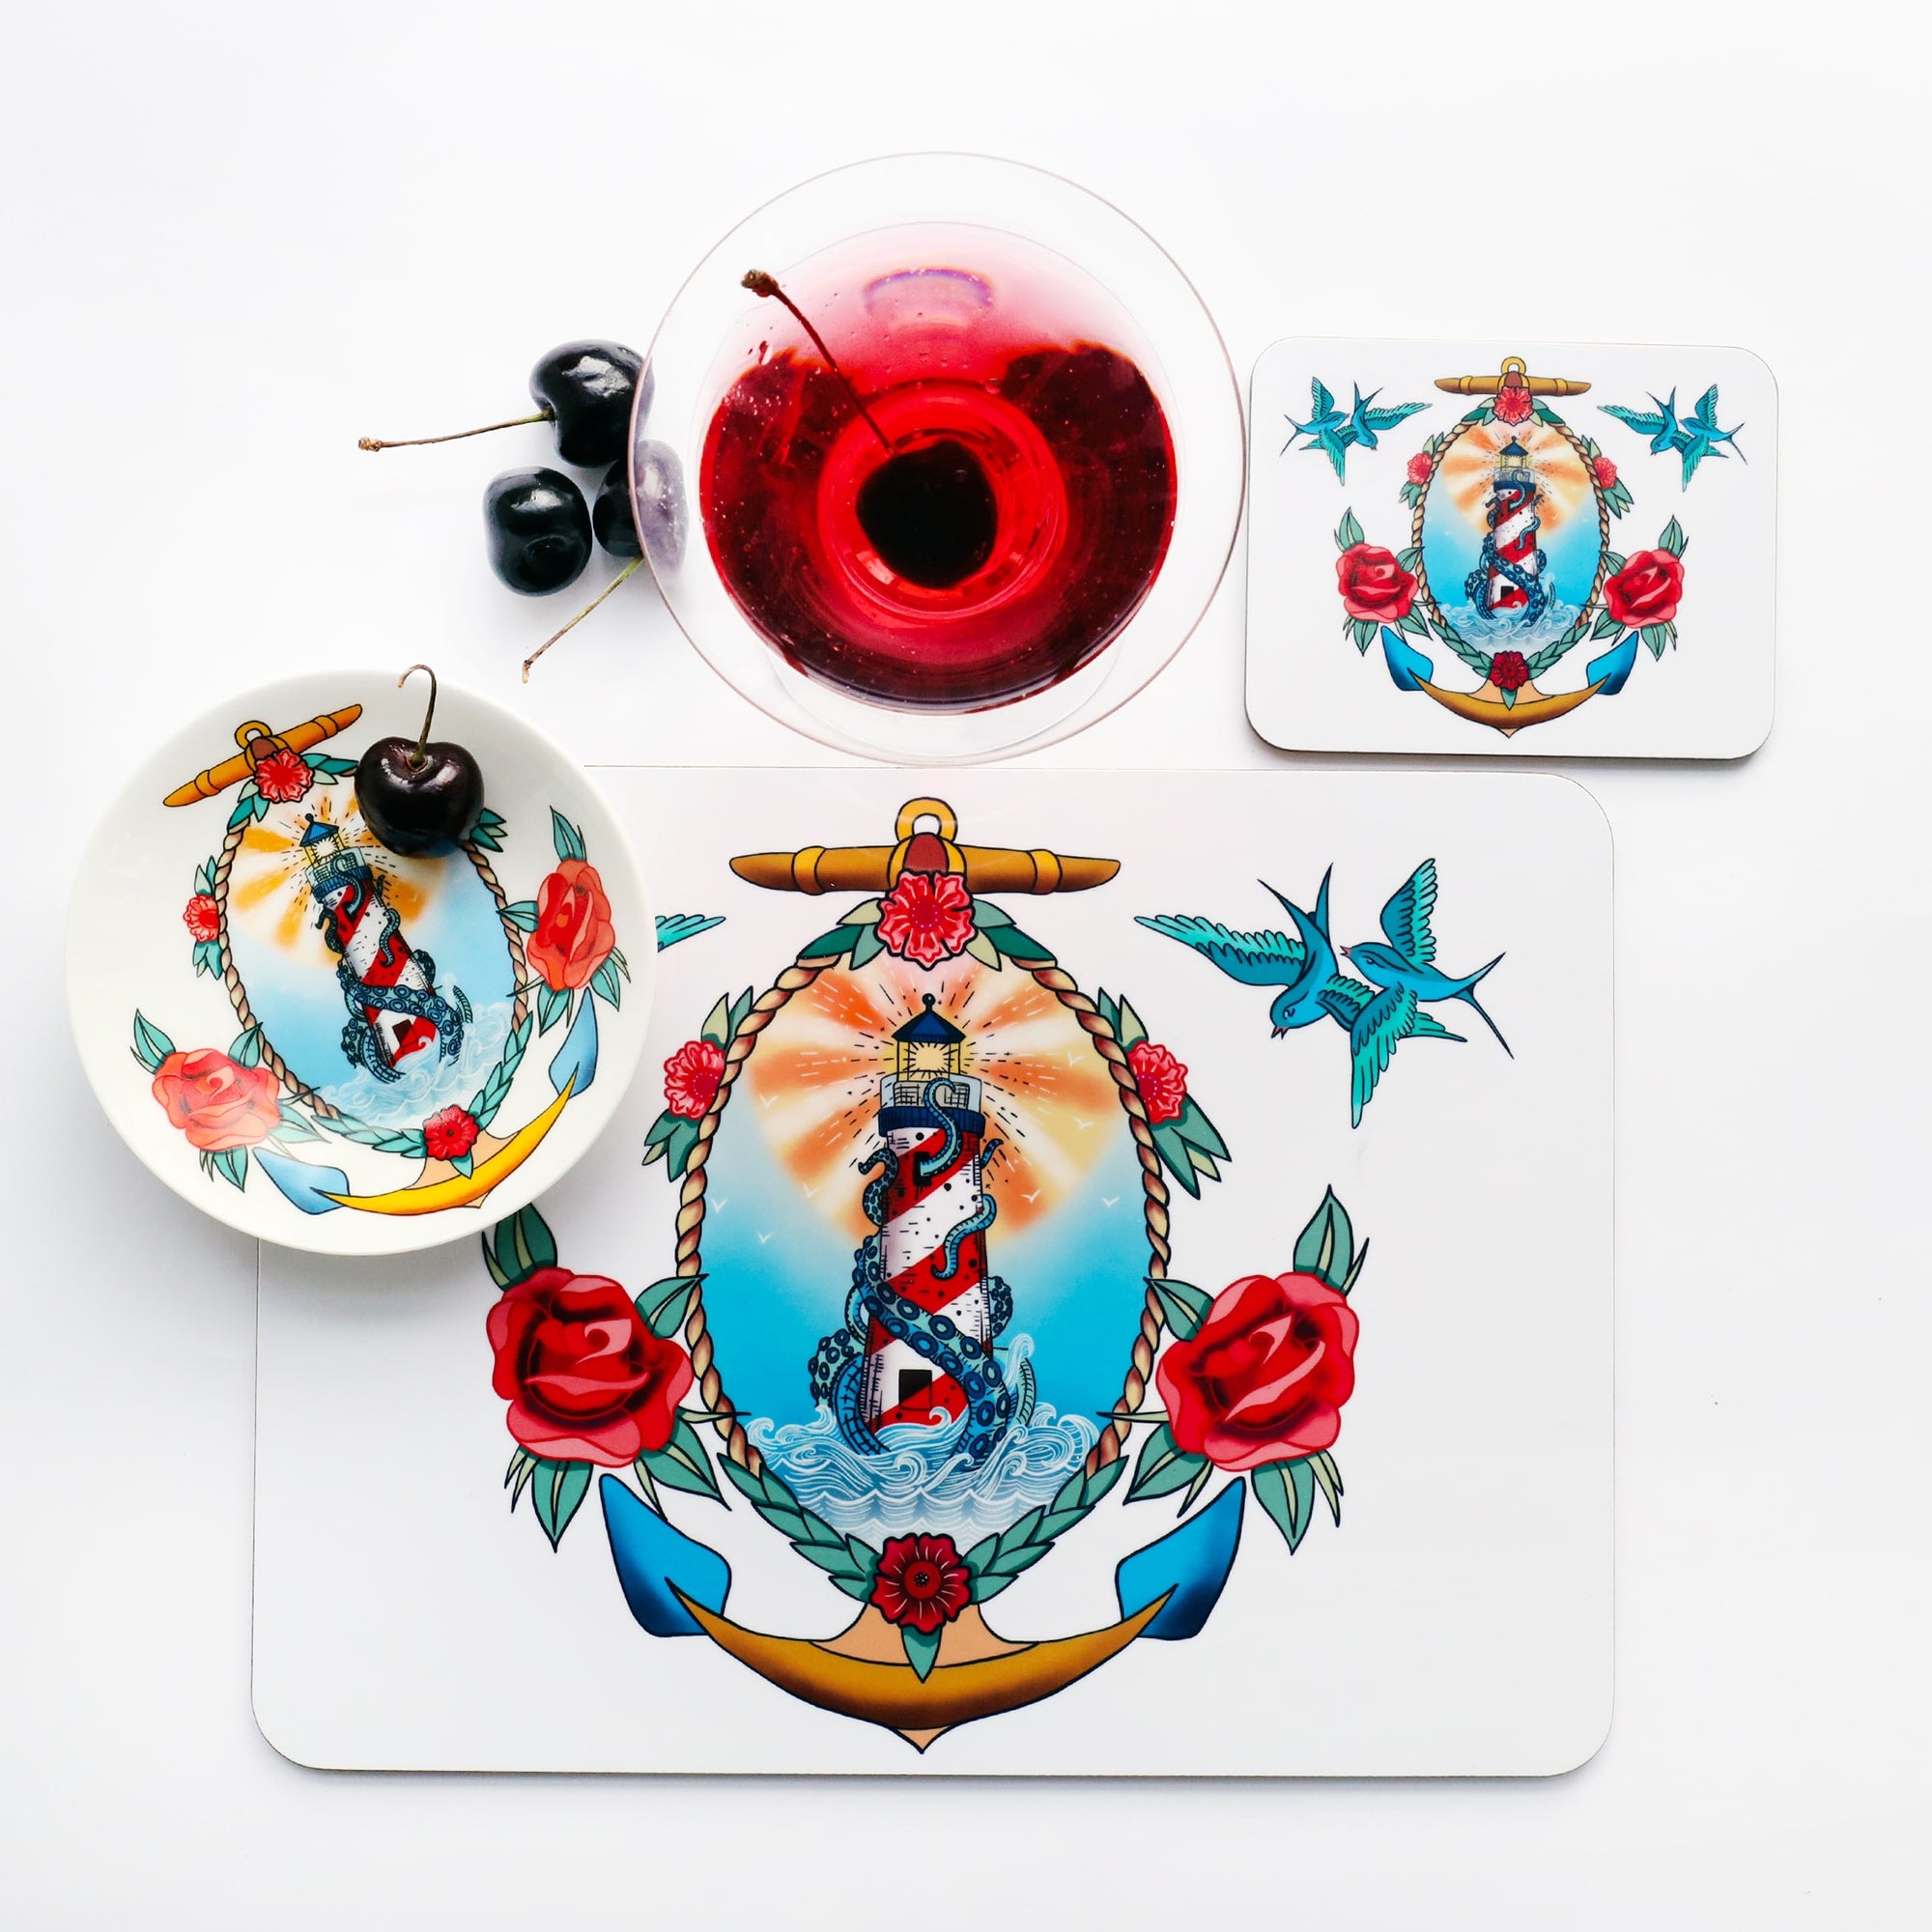 Place setting with placemat, coaster and nibbles dish all the the same lighthouse, kraken and roses design that is inspired by a sailors tattoos. The place setting is shot from above and there is a red cocktail and cherries just above the placemat.